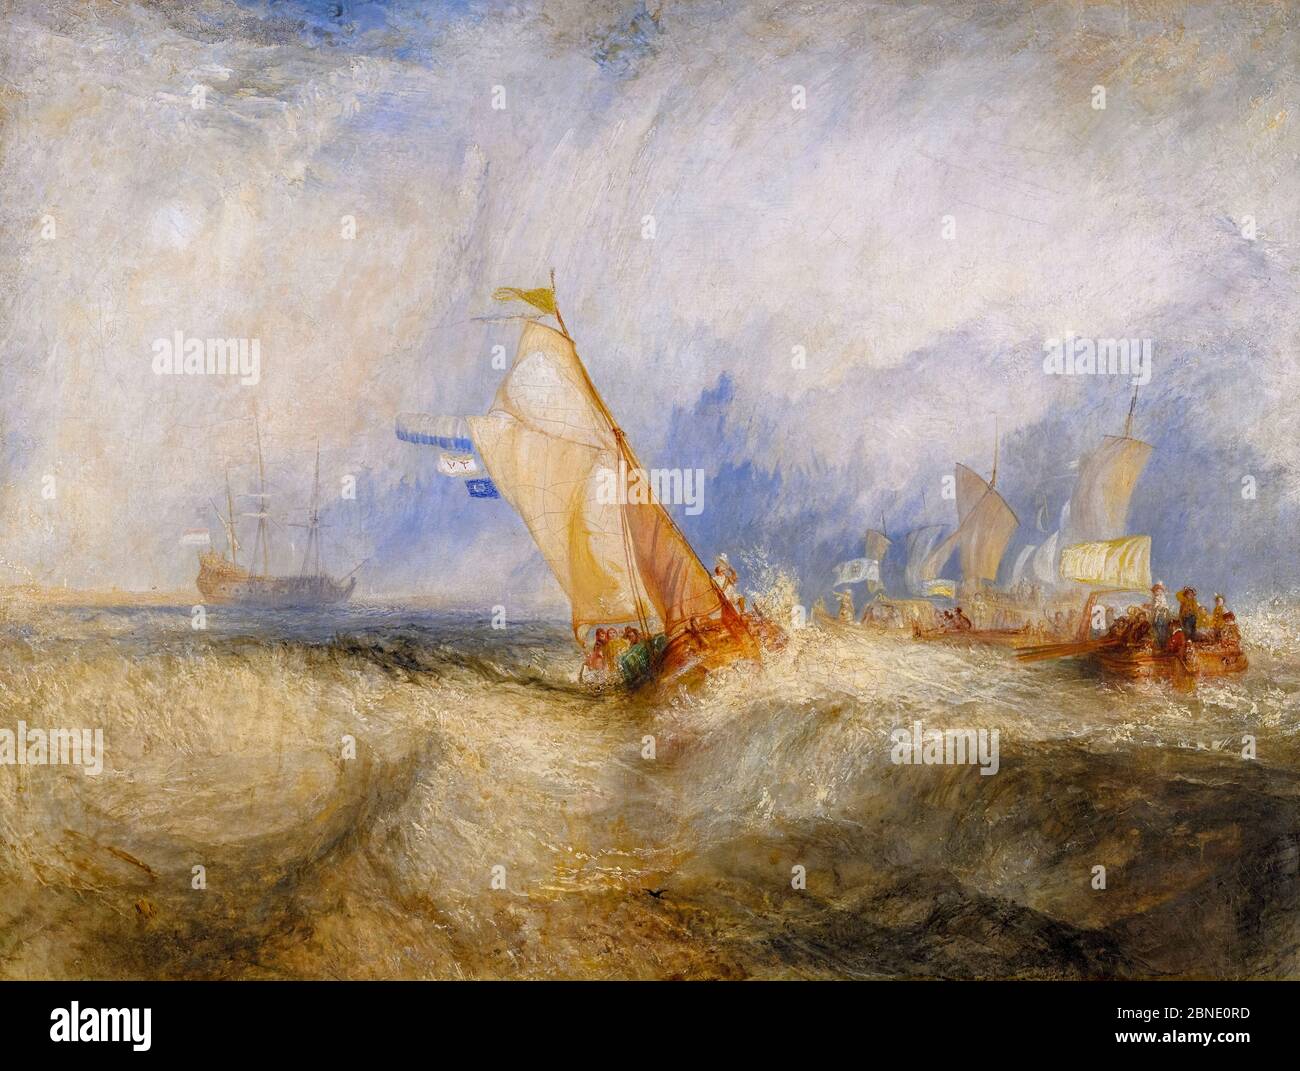 Van Tromp, going about to please his Masters, Ships at Sea, getting a Good Wetting by JMW Turner (1775-1851), oil on canvas, 1844 Stock Photo